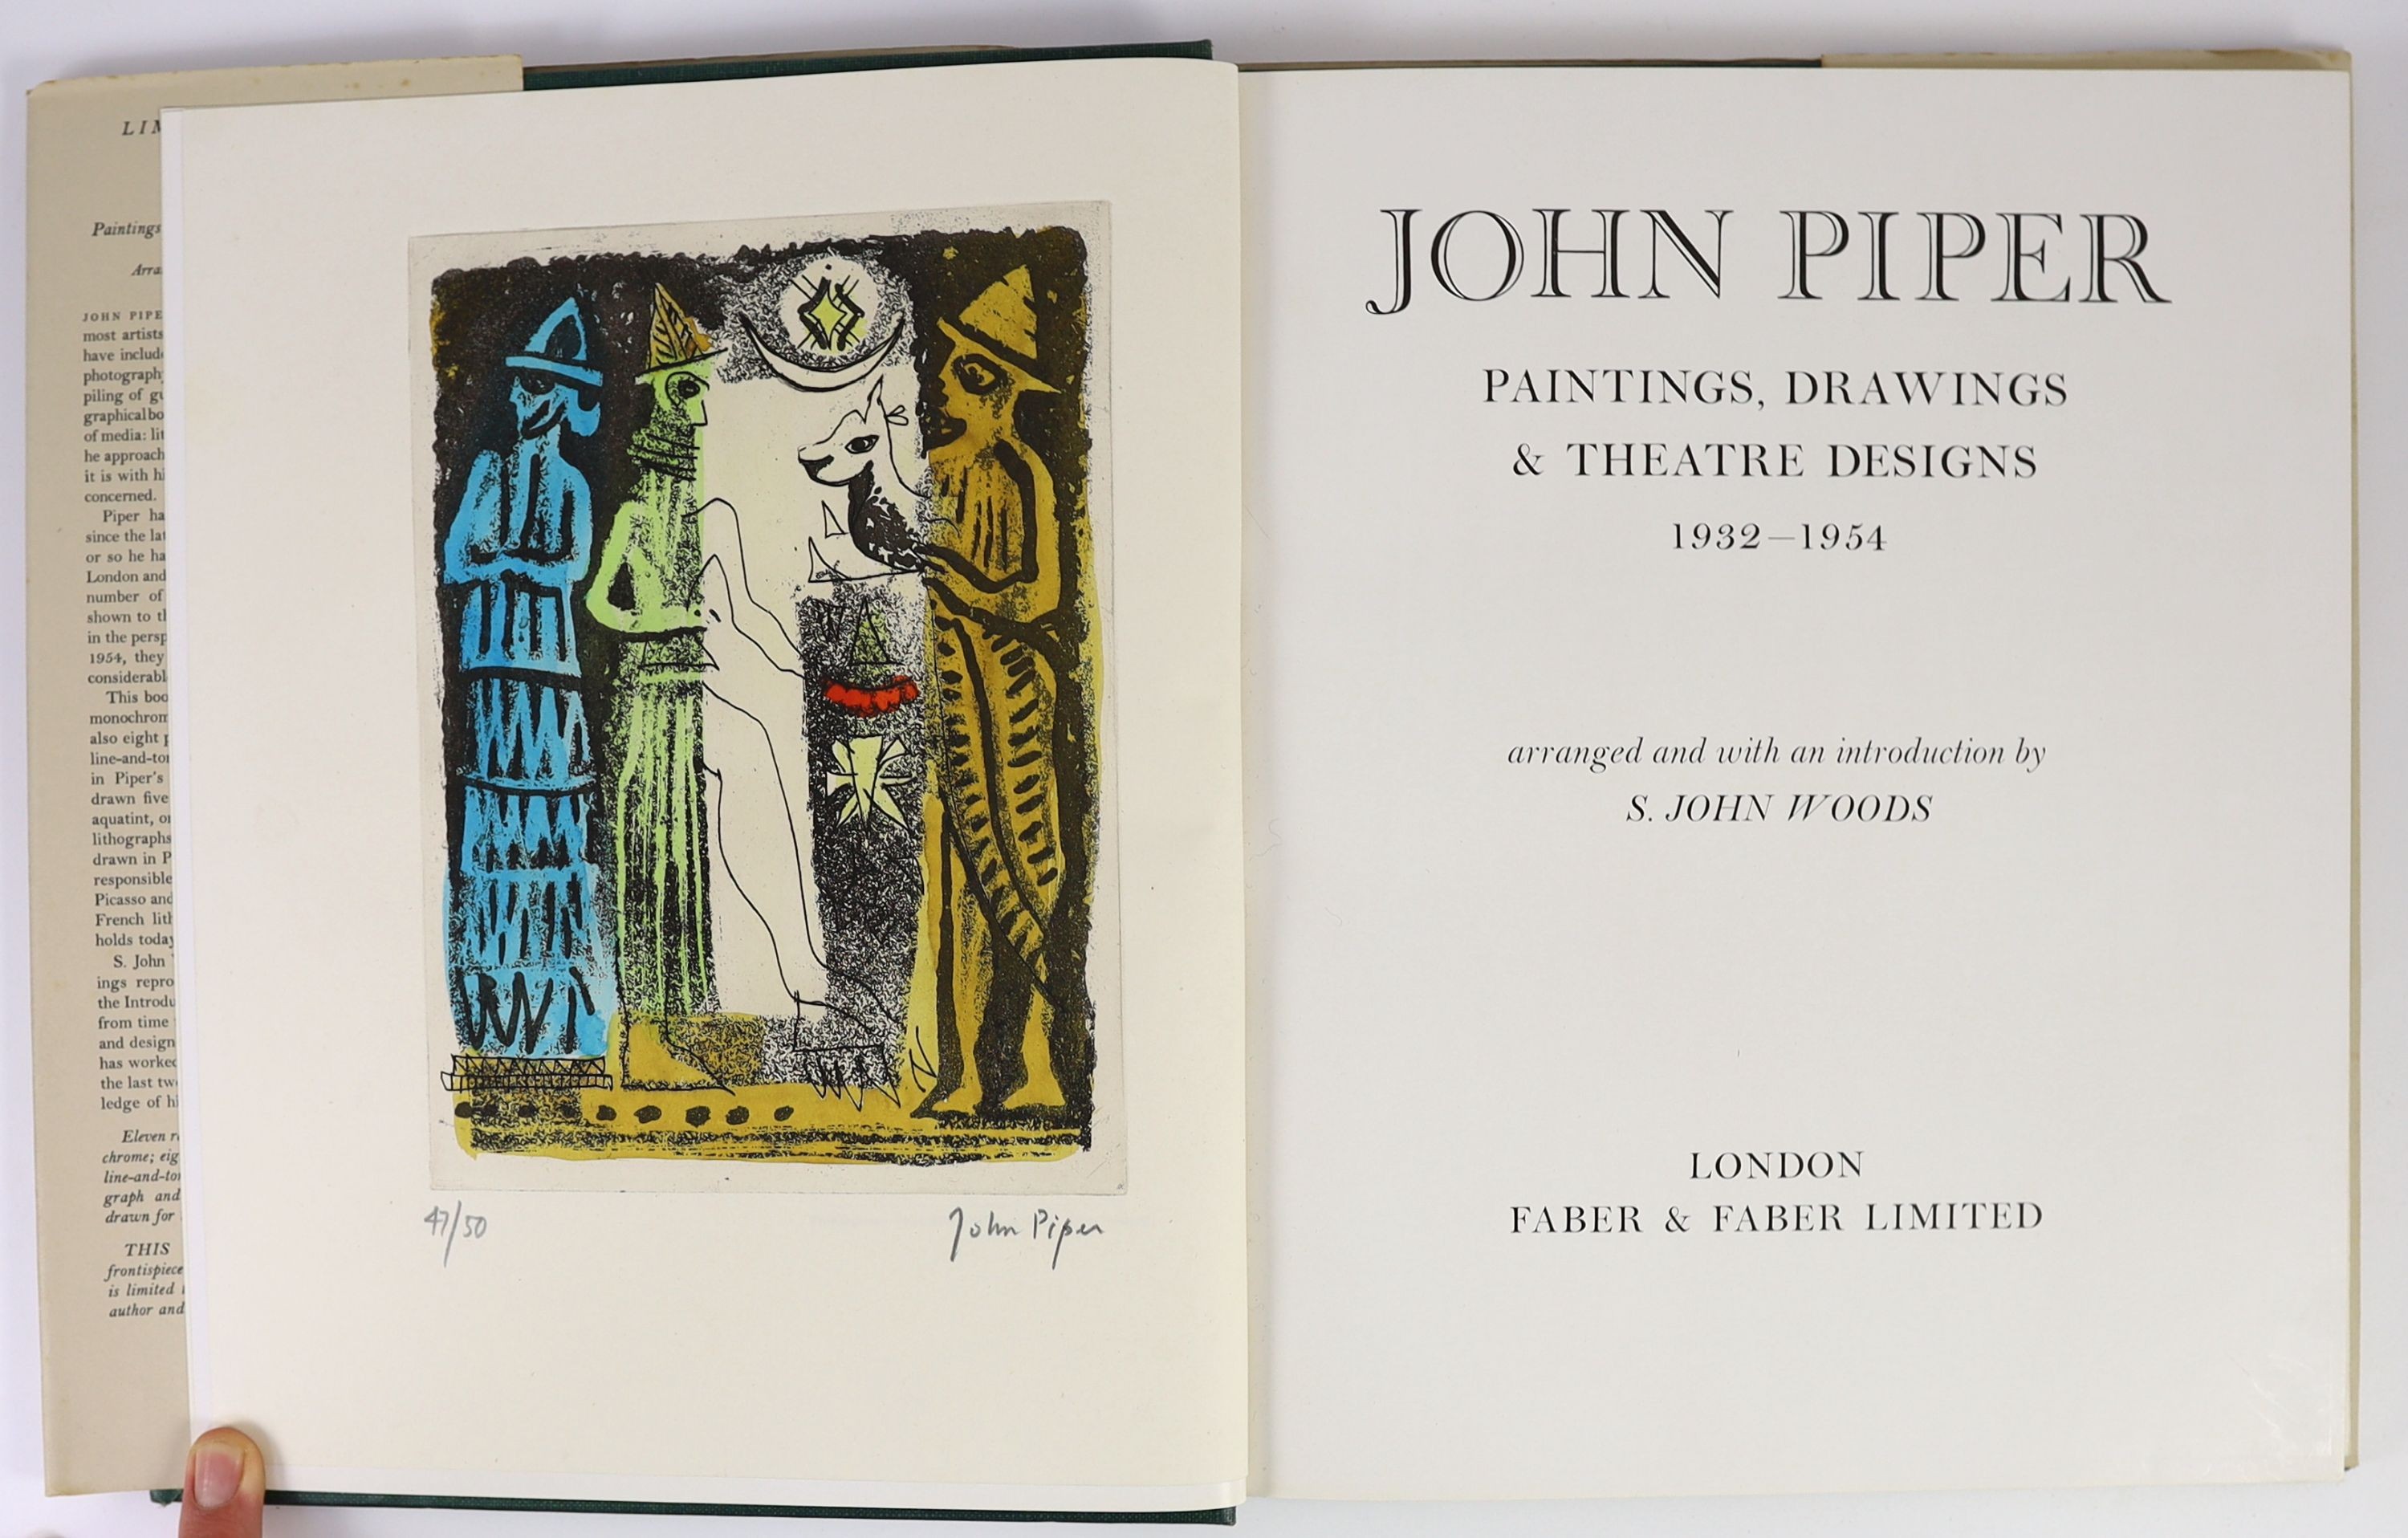 Piper, John - Paintings, Drawings & Theatre Designs, 1st edition, one of 50 with signed, hand-coloured aquatint frontispiece, 4to, green buckram gilt, with unclipped d/j, Faber & Faber, London, 1955, in slip case.